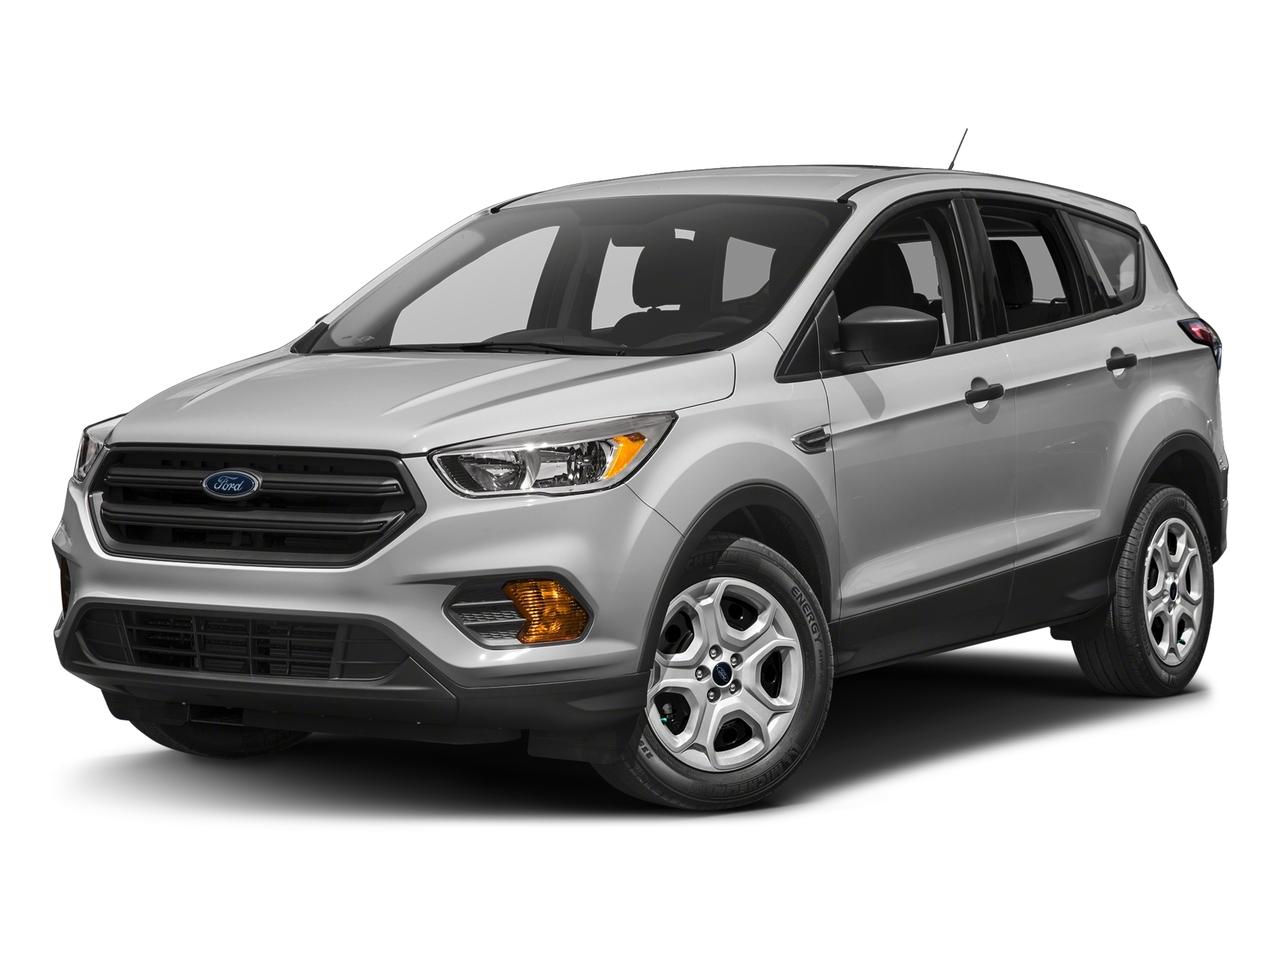 2017 Ford Escape Vehicle Photo in Margate, FL 33063